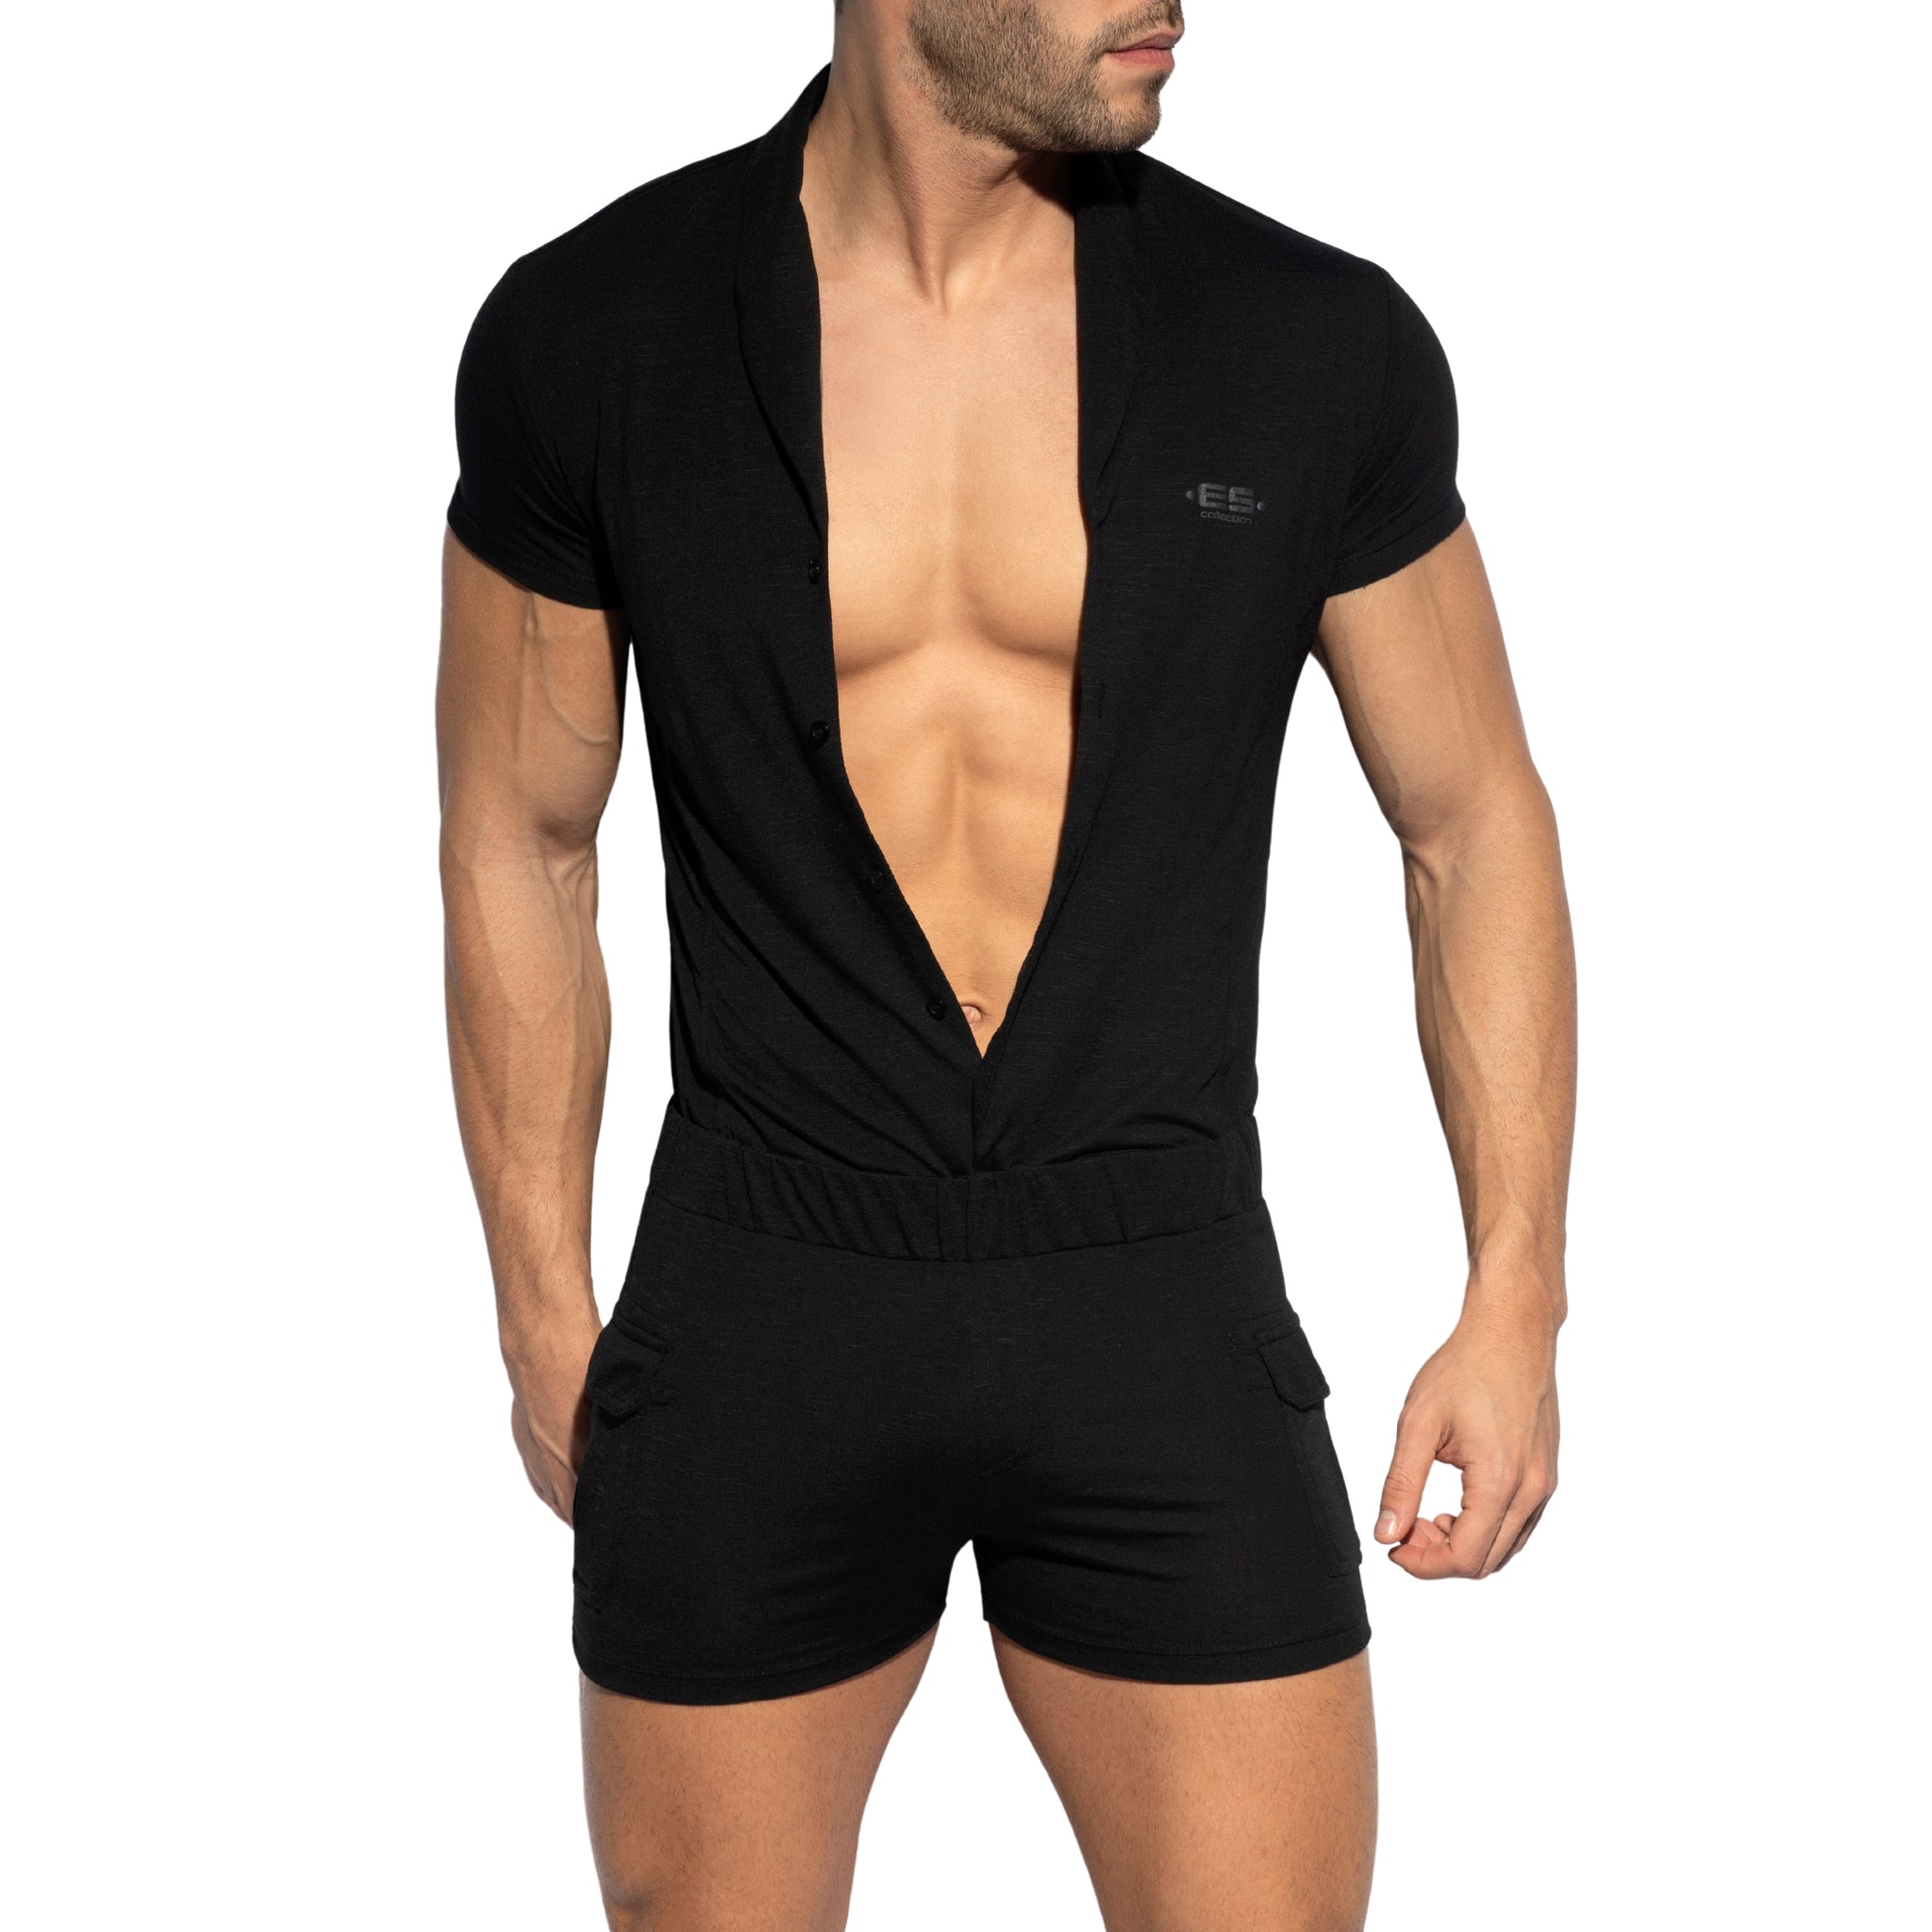 ES Collection Sleeves Body Suit Black SP256